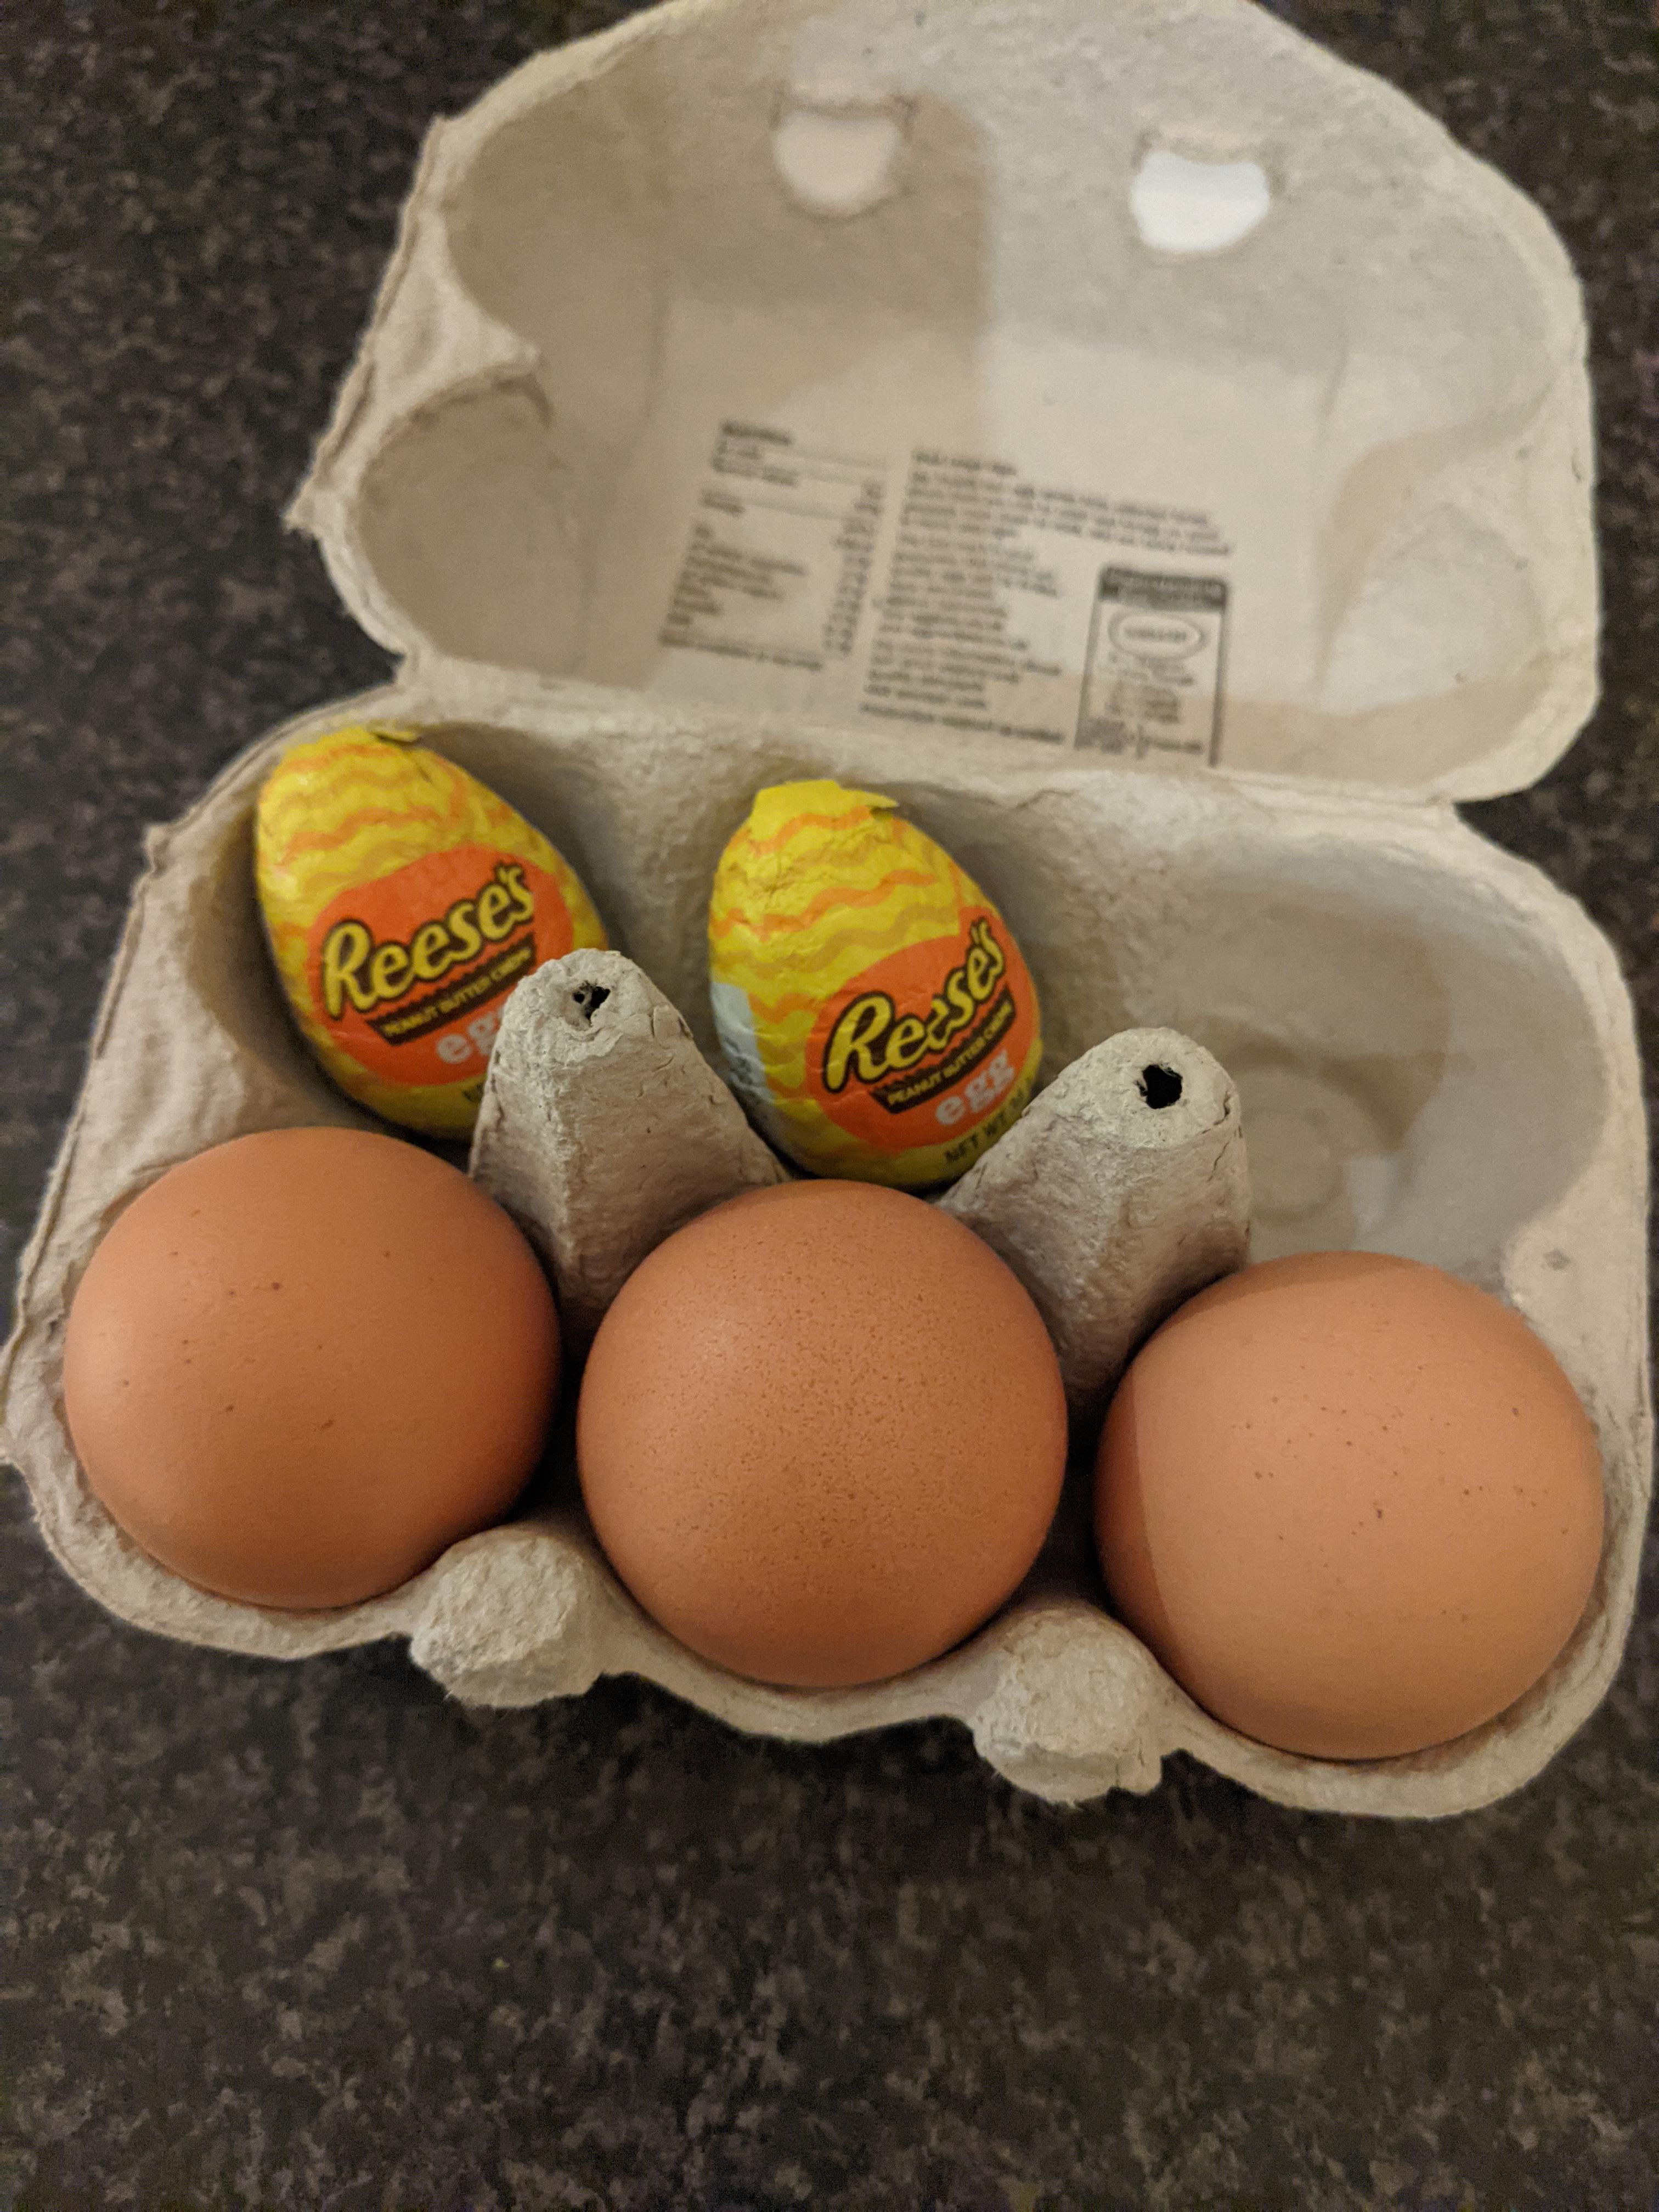 Found the perfect spot to hid these from my egg-hating, Reese's-loving boyfriend